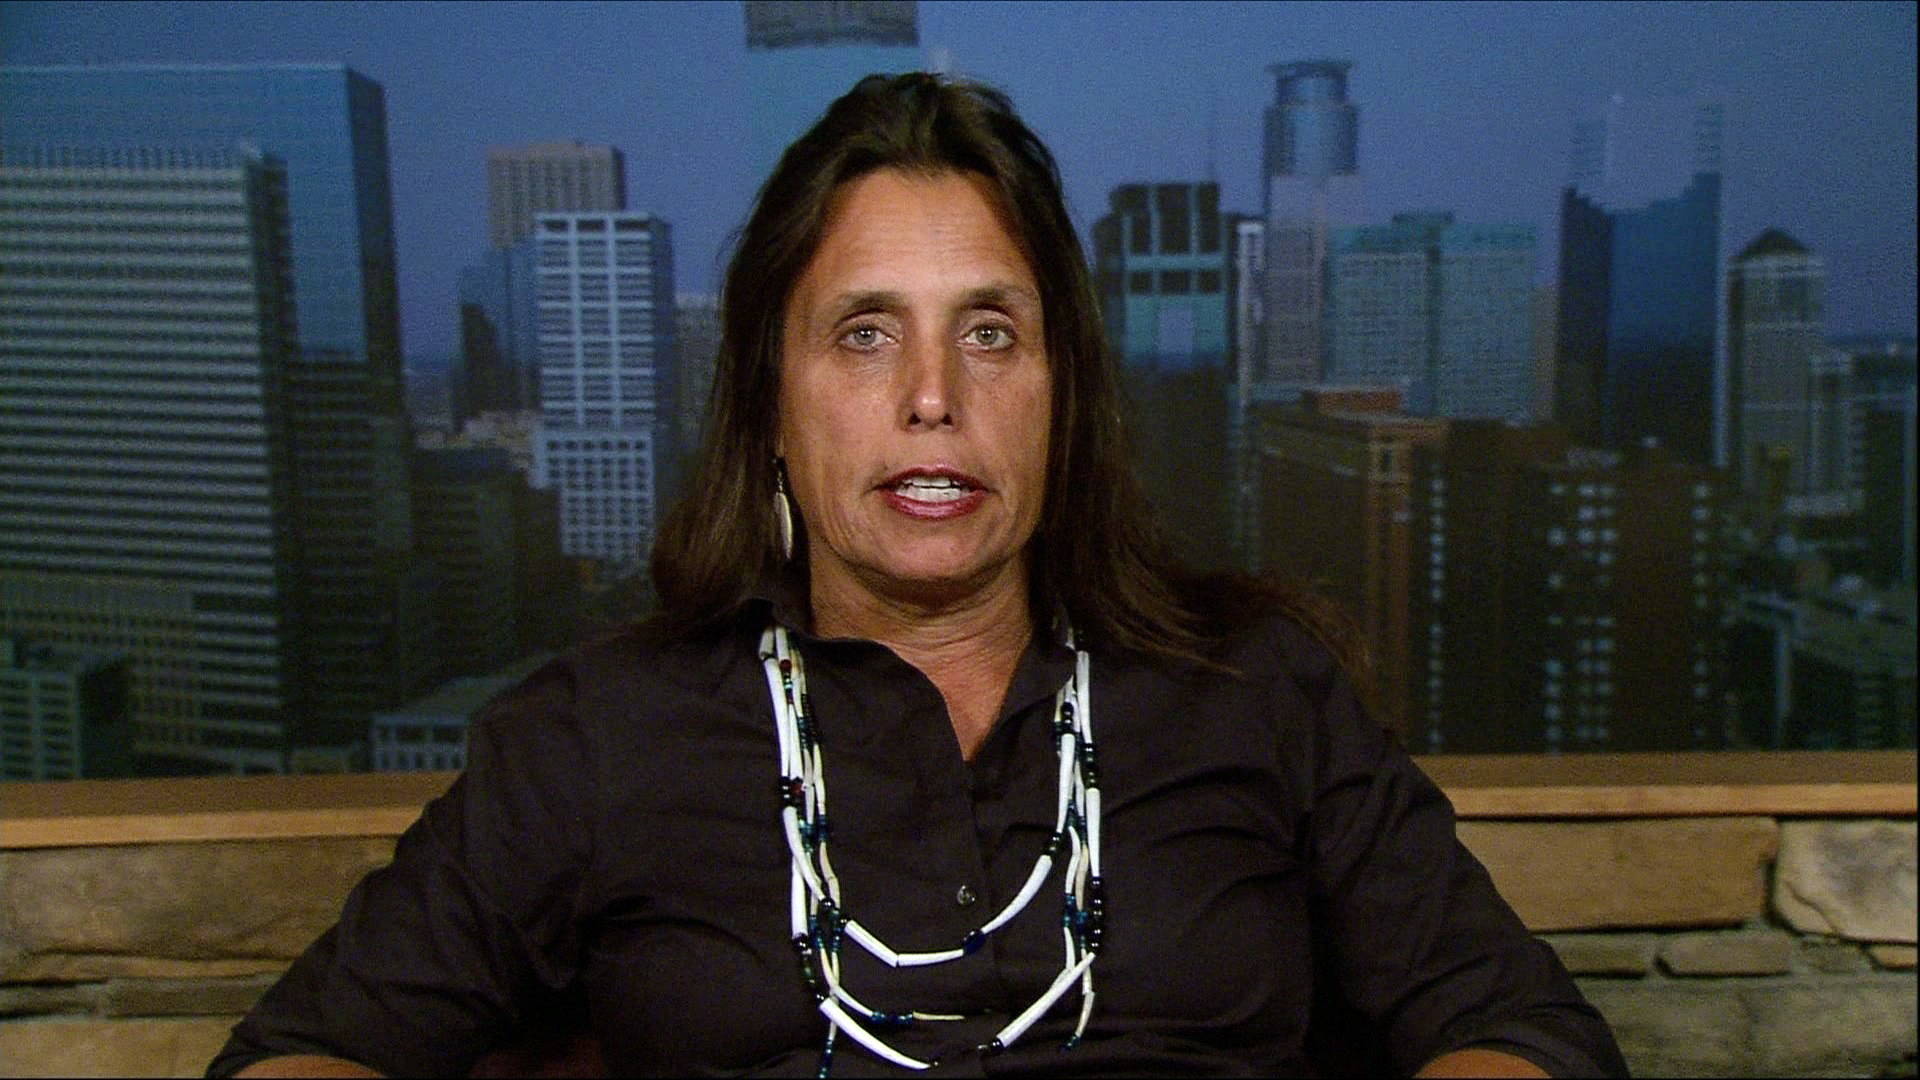 Honor the Earth Executive Director Winona LaDuke allegedly tried to silence a former employee who was sexually harassed by a coworker “credibly accused” of molesting young boys.